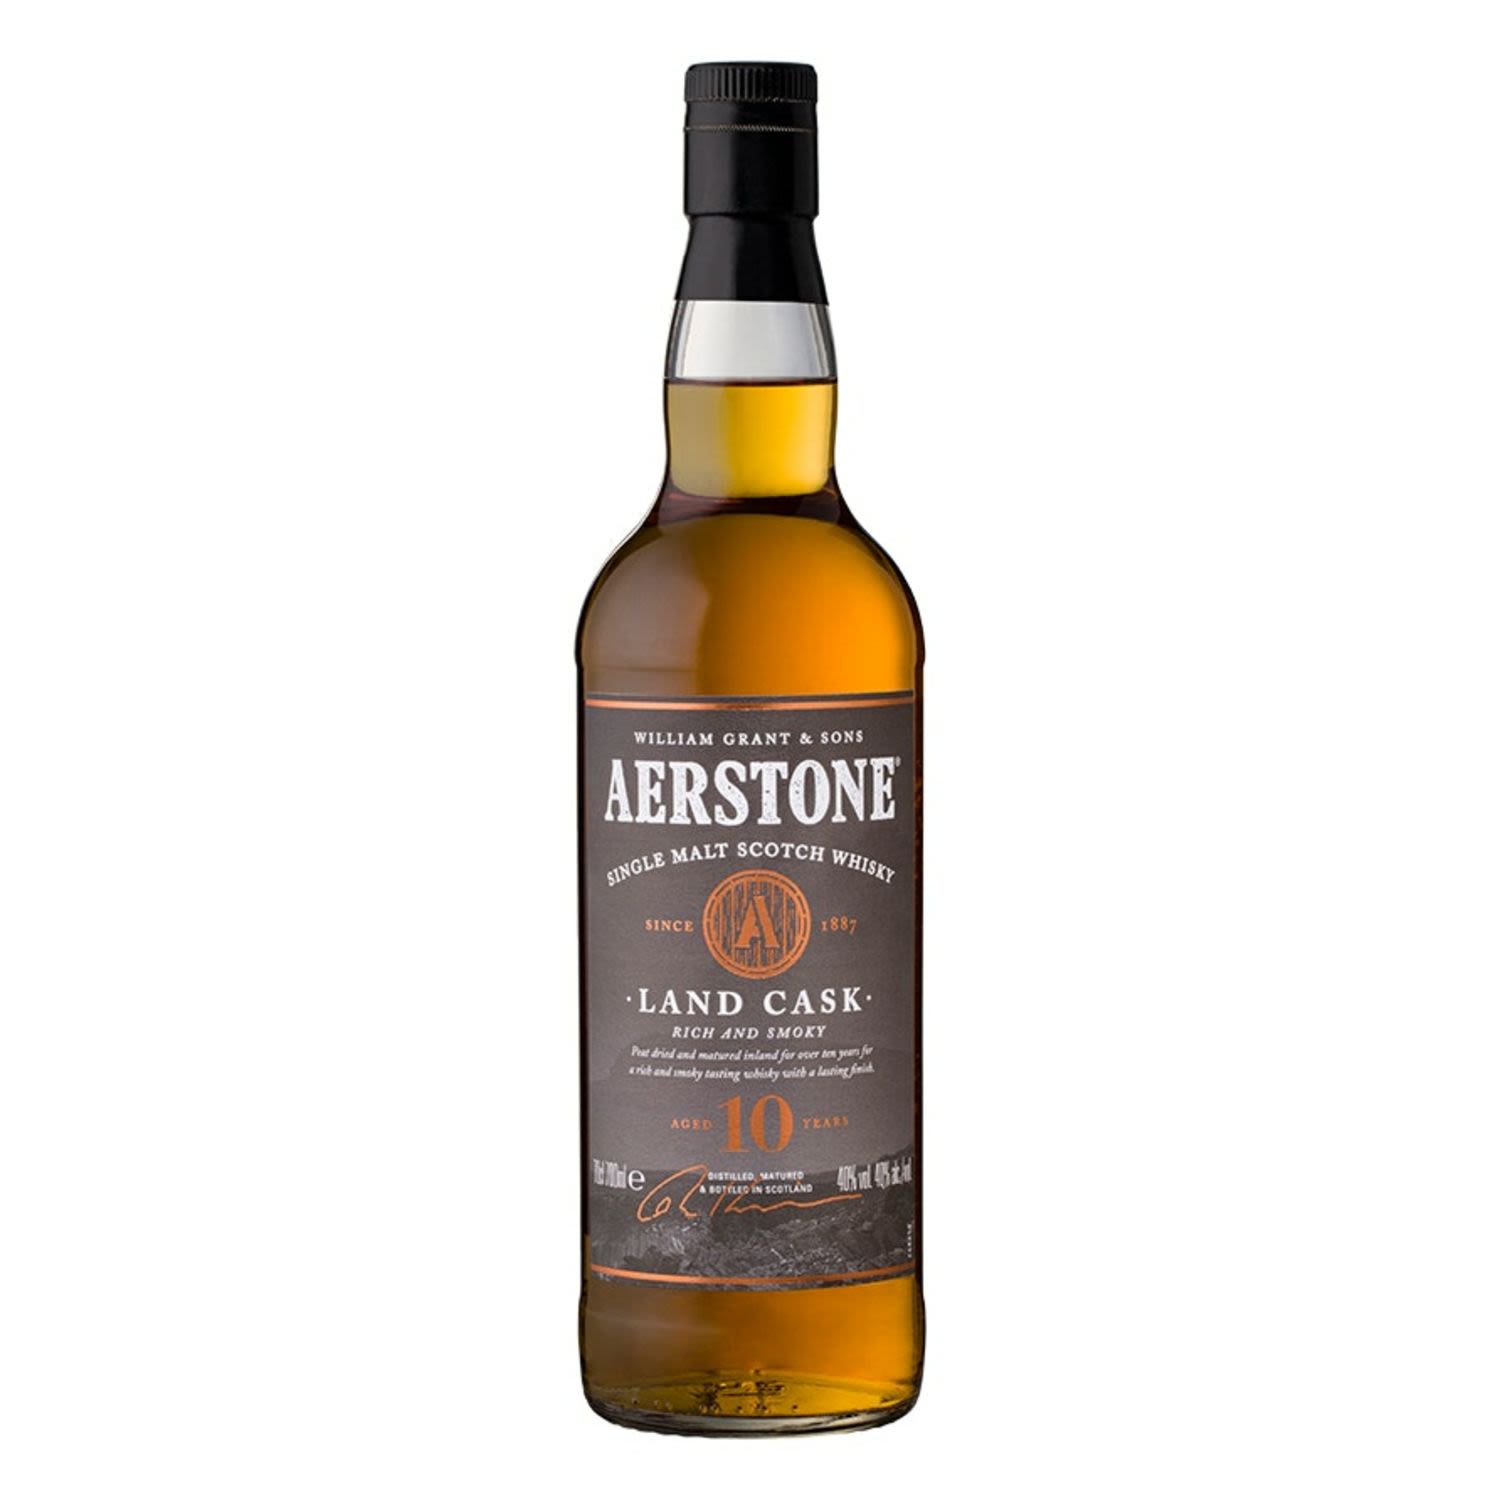 Aestone Land Cask is a rich and smoky tasting whisky matured for more than 10 years in aging cellars that are further inland from the sea. The "LAND" champions the use of highland peat and is therefore rich and smoky in character. There's a lot to like here. Aromas of rich and punchy peat with layers of coal tar and damp bonfire smoke - punctuated with vibrant, zesty citrus notes that flow onto a palate with an initial rush of peat and wood smoke followed by a gentle sweetness with hints of spice and ripe fruits enveloped in smoke.  This bottle is one of two distinctive styles in the Aerstone's range - which are clearly defined by their taste profile on the bottle and pack. <br /> <br />Alcohol Volume: 40.00%<br /><br />Pack Format: Bottle<br /><br />Standard Drinks: 22.1</br /><br />Pack Type: Bottle<br /><br />Country of Origin: Scotland<br />